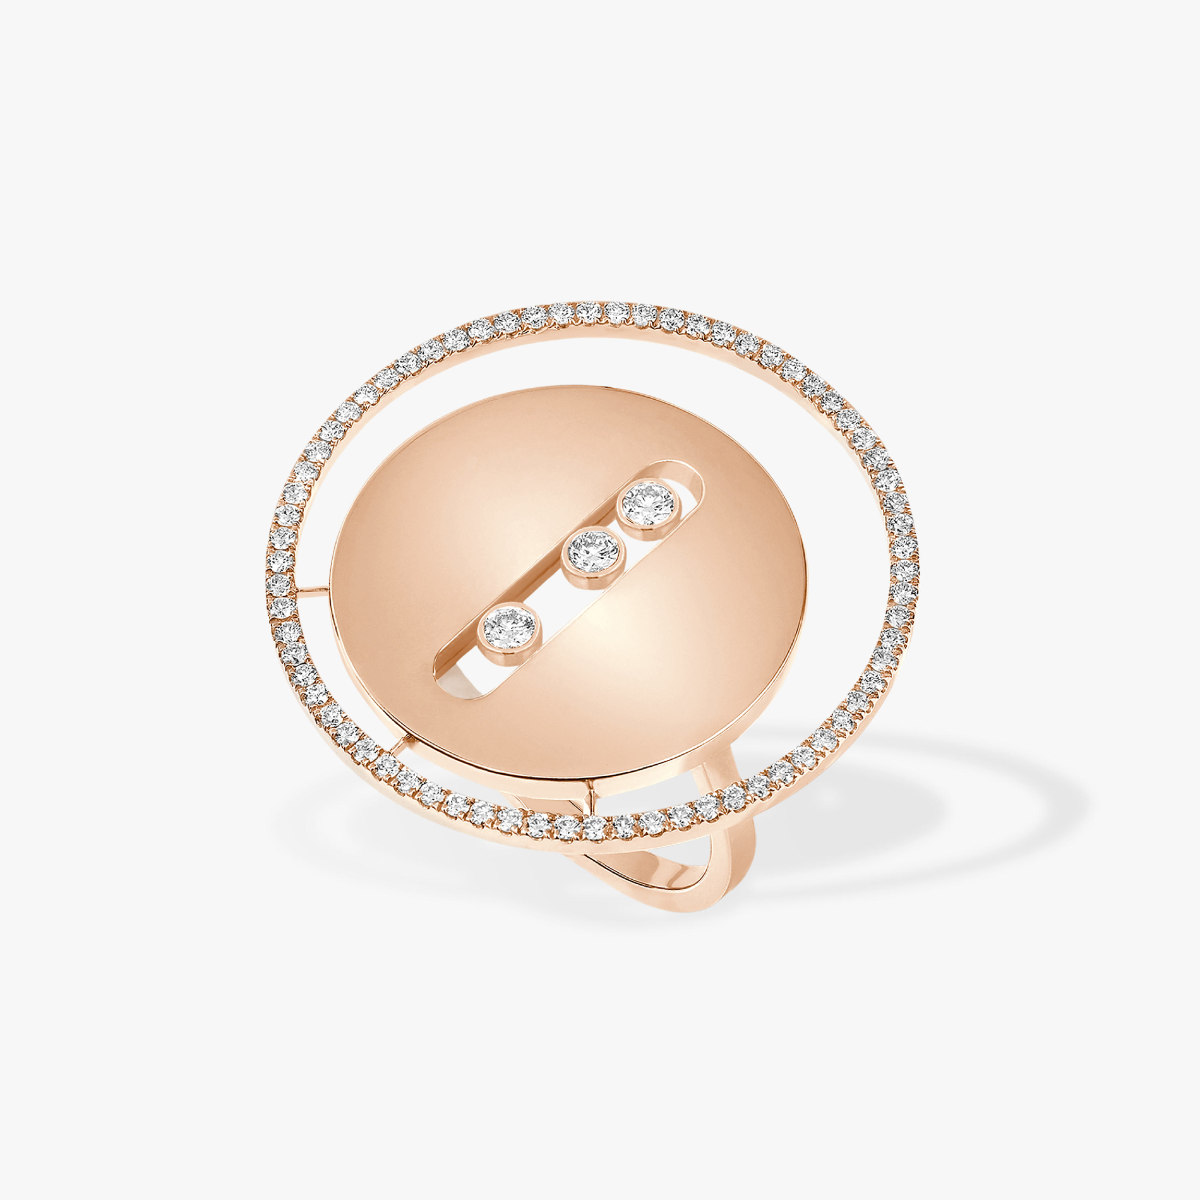 Messika Boutique Luxembourg: Move Romane Pink Gold Diamond Ring - Luxferity